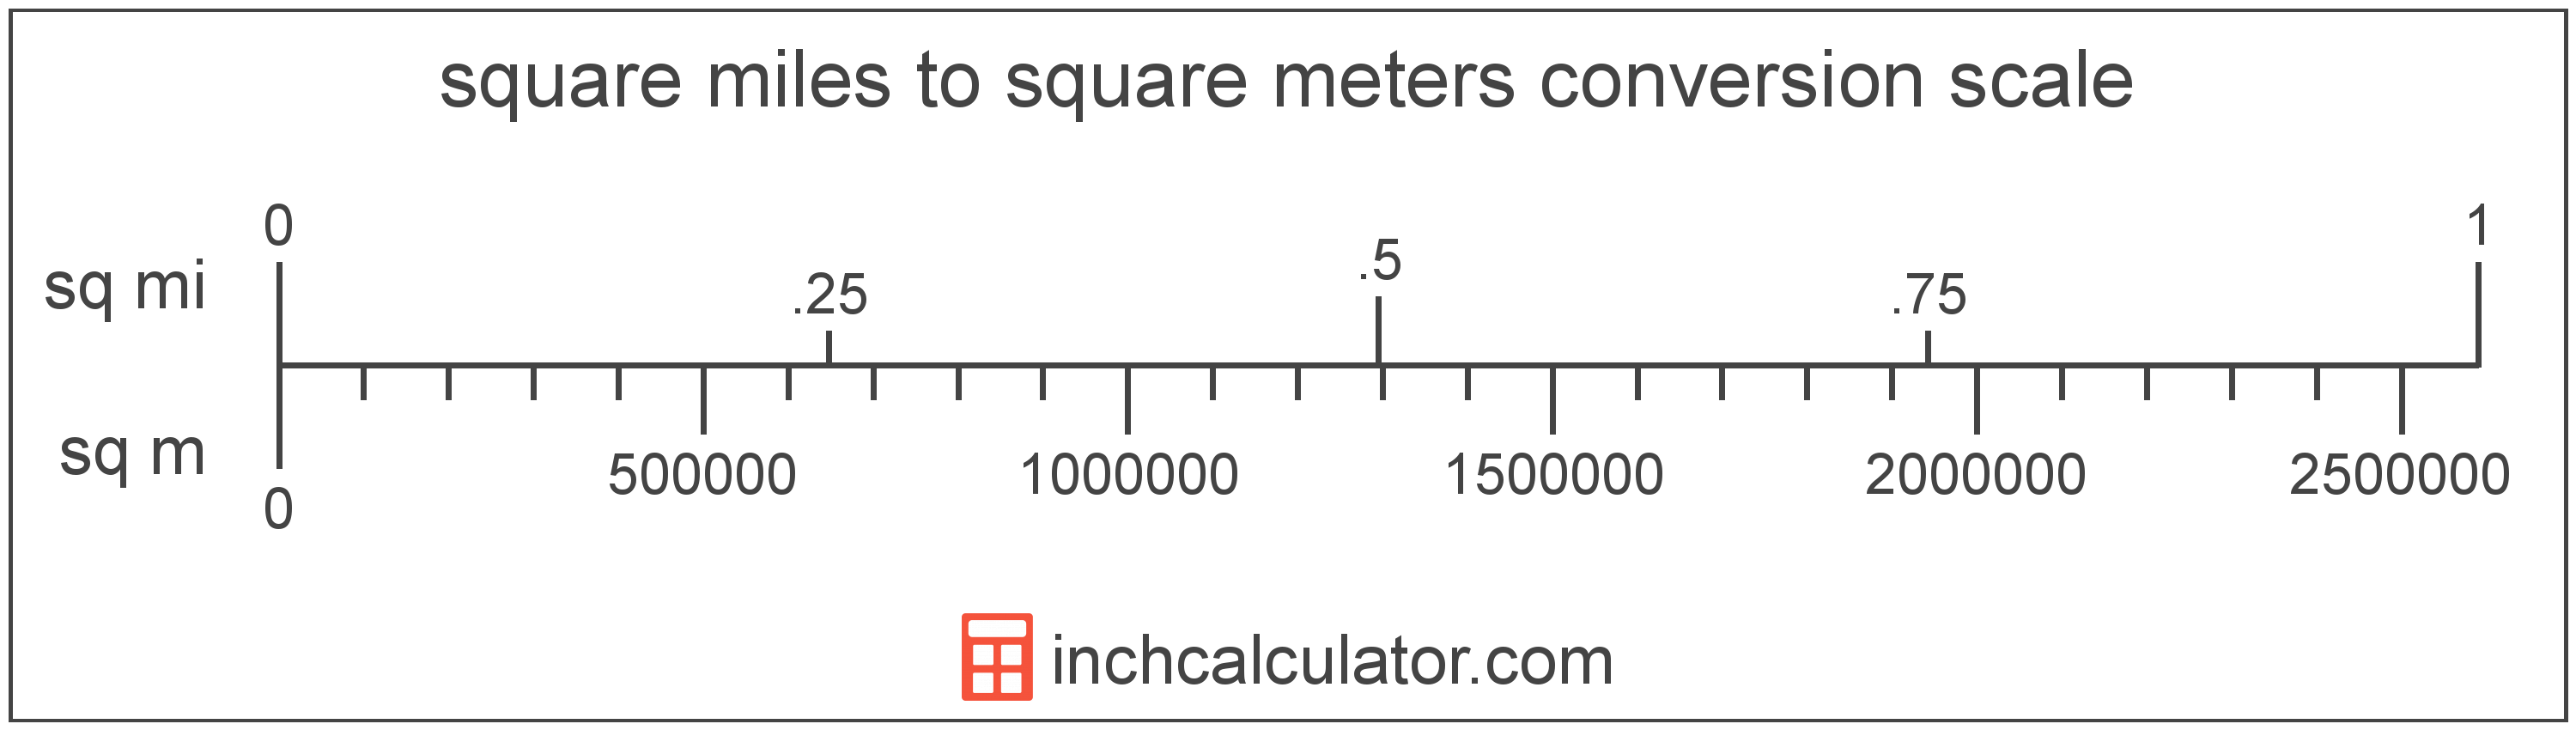 conversion scale showing square miles and equivalent square meters area values